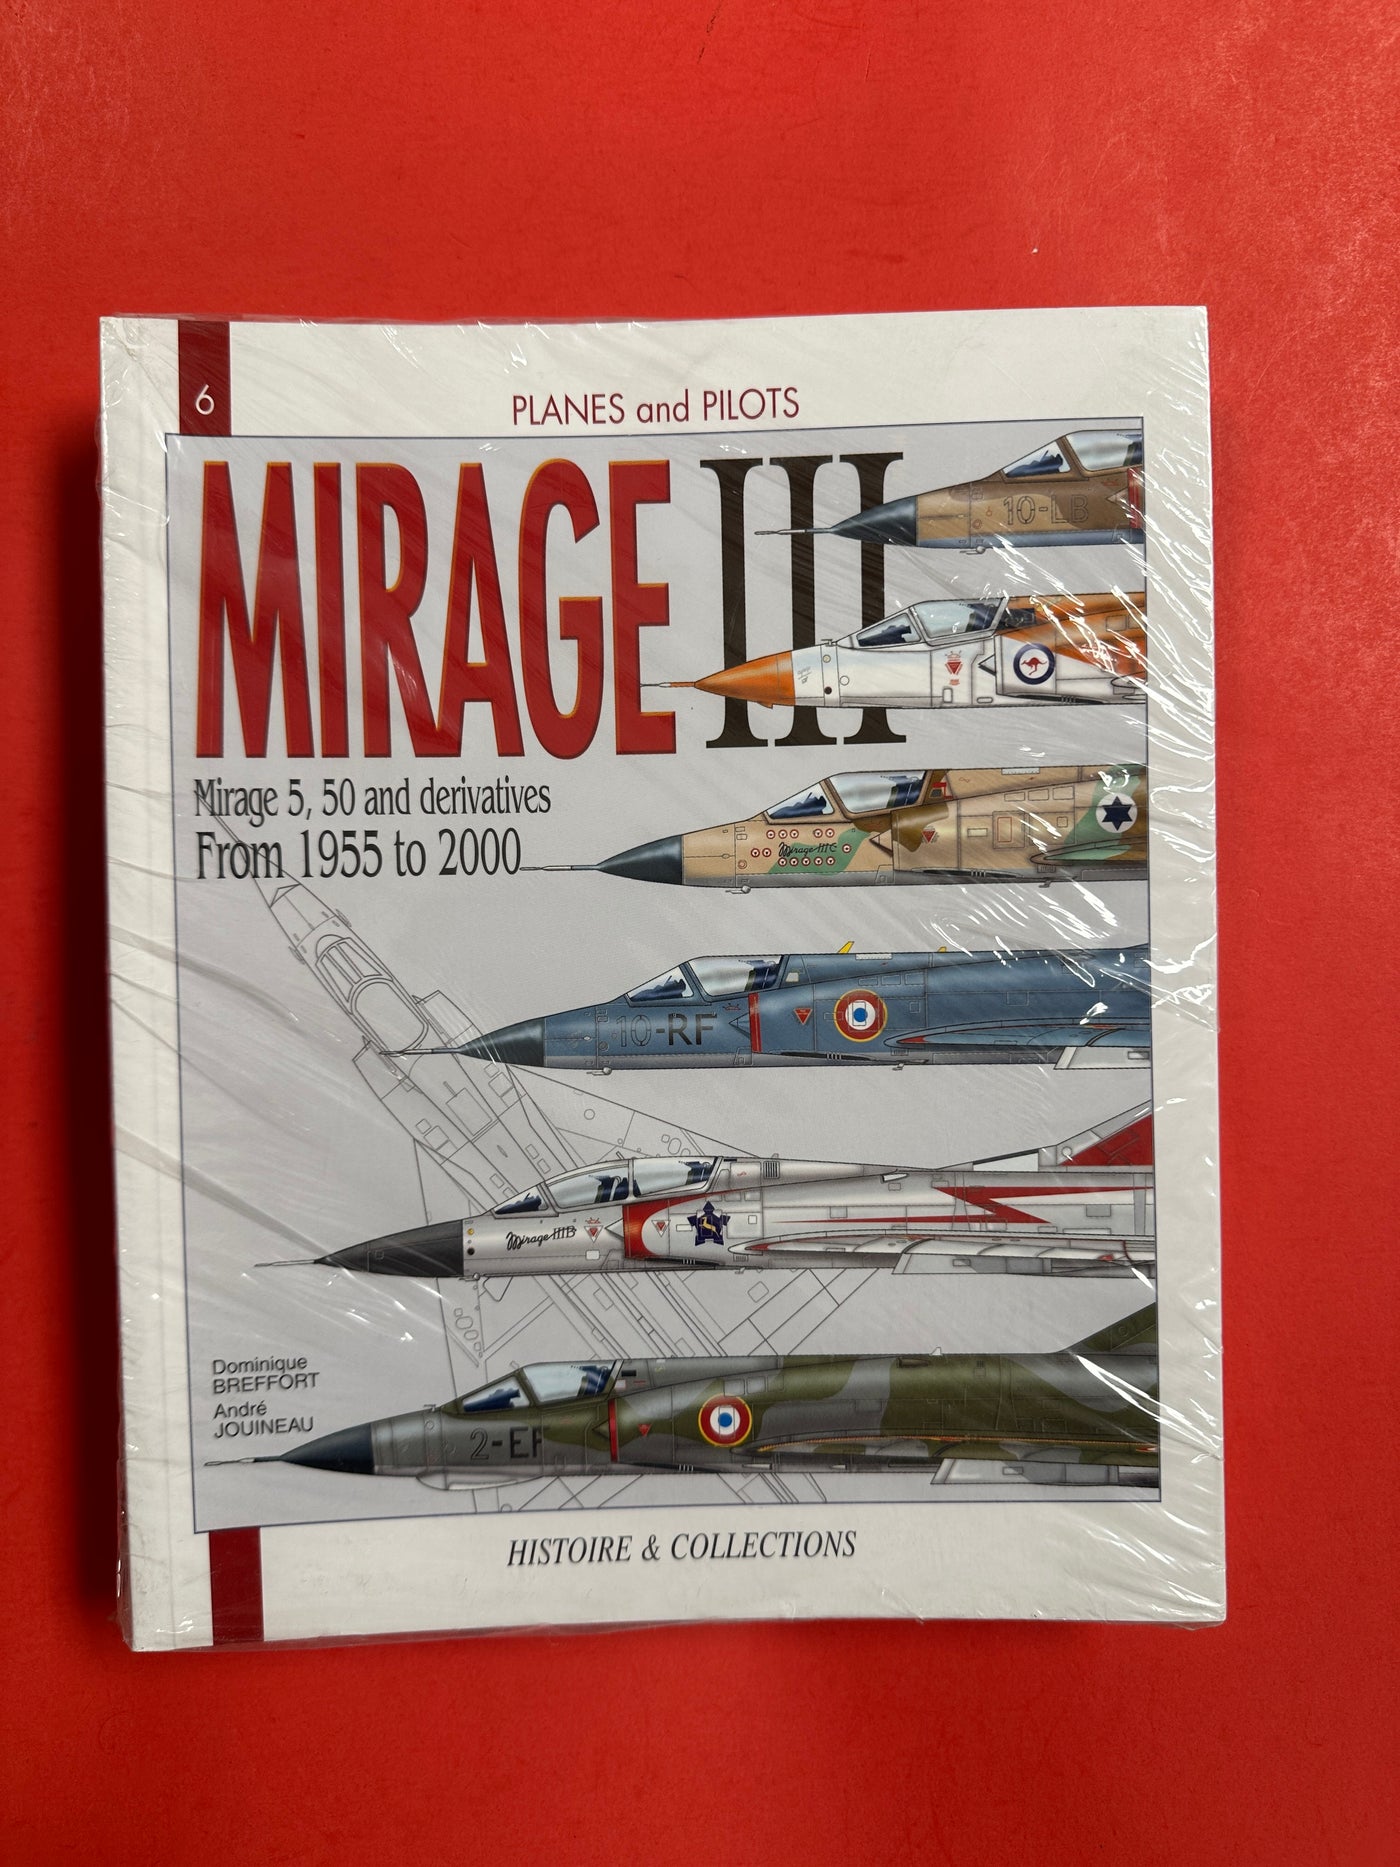 Mirage III-C: From 1955 - 2000 (Planes and Pilots 6)